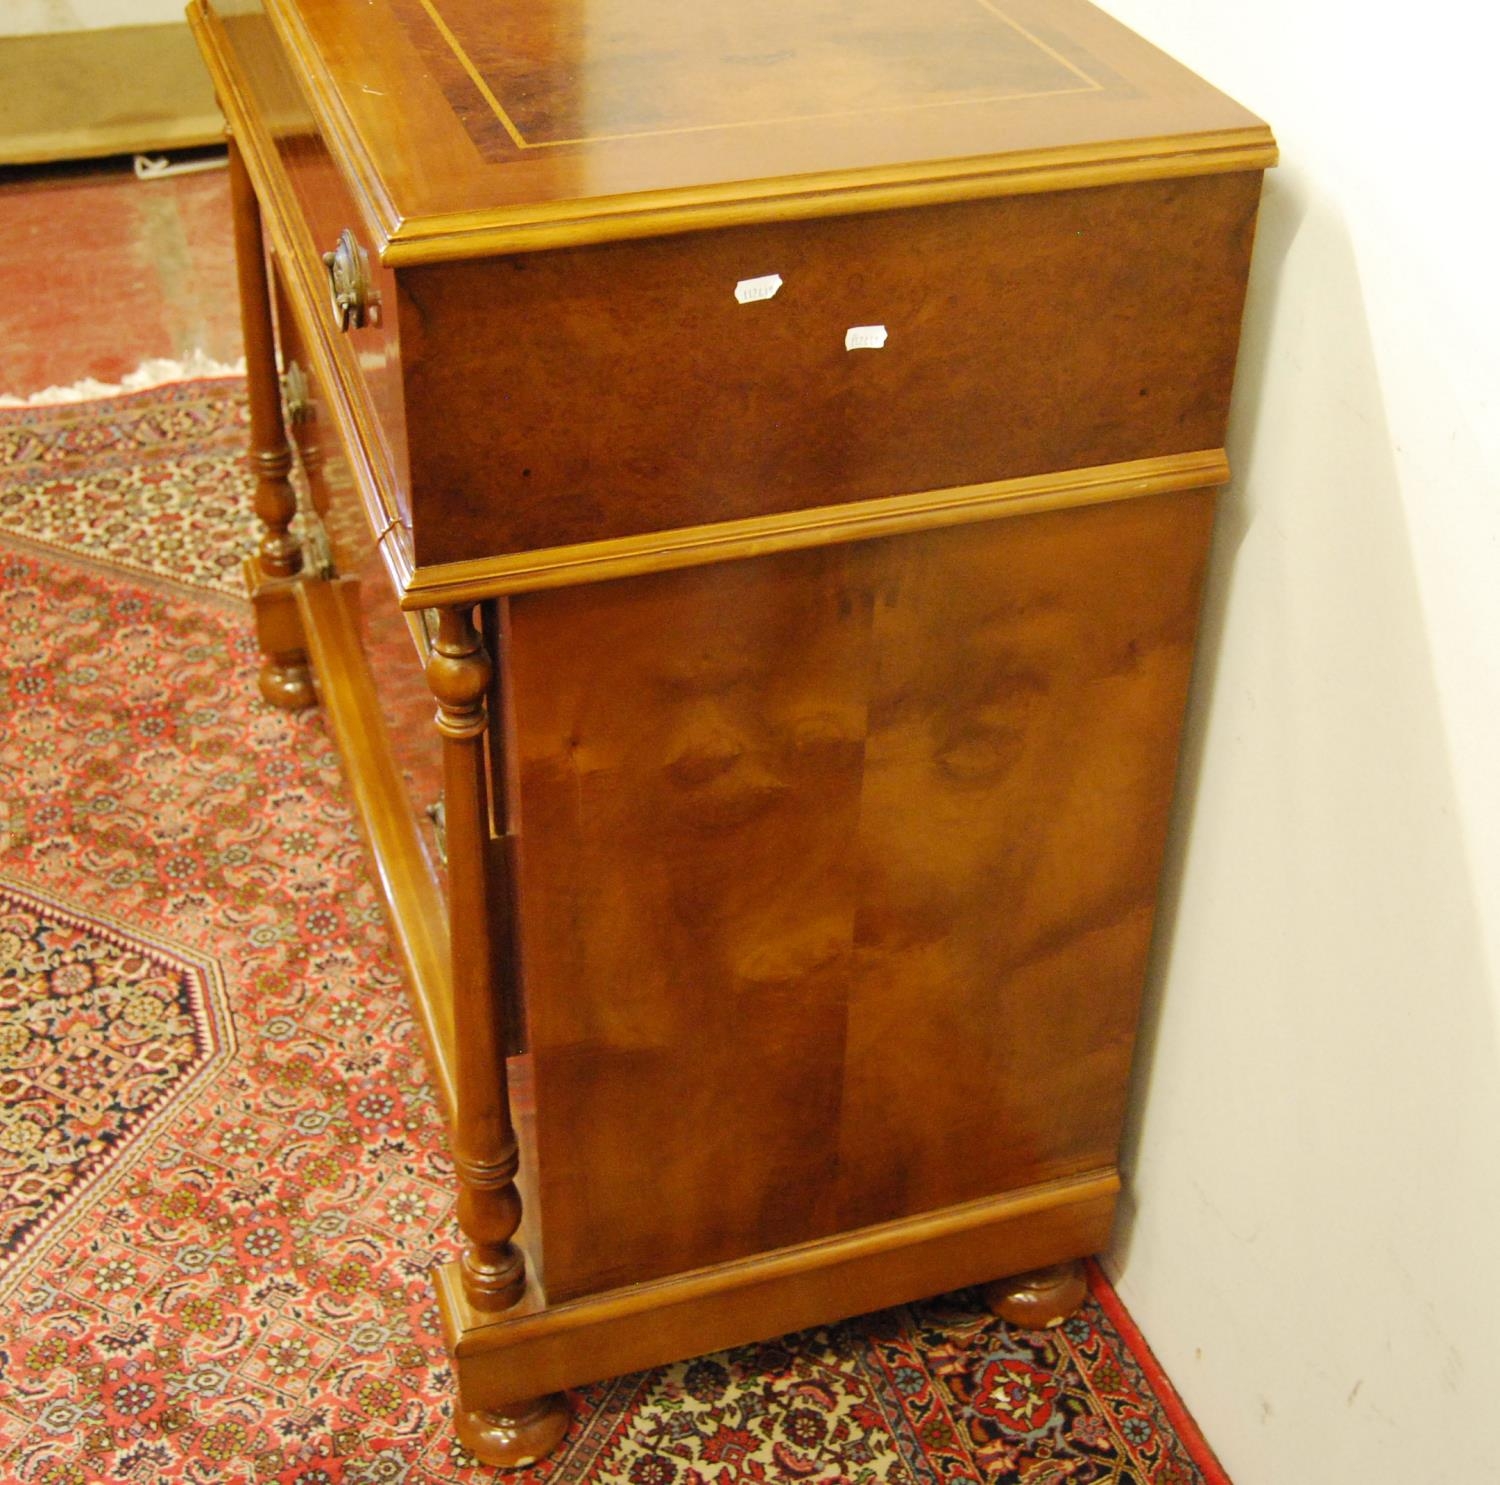 French-style reproduction walnut secrétaire chest of drawers, with a fall front secrétaire drawer to - Image 5 of 5